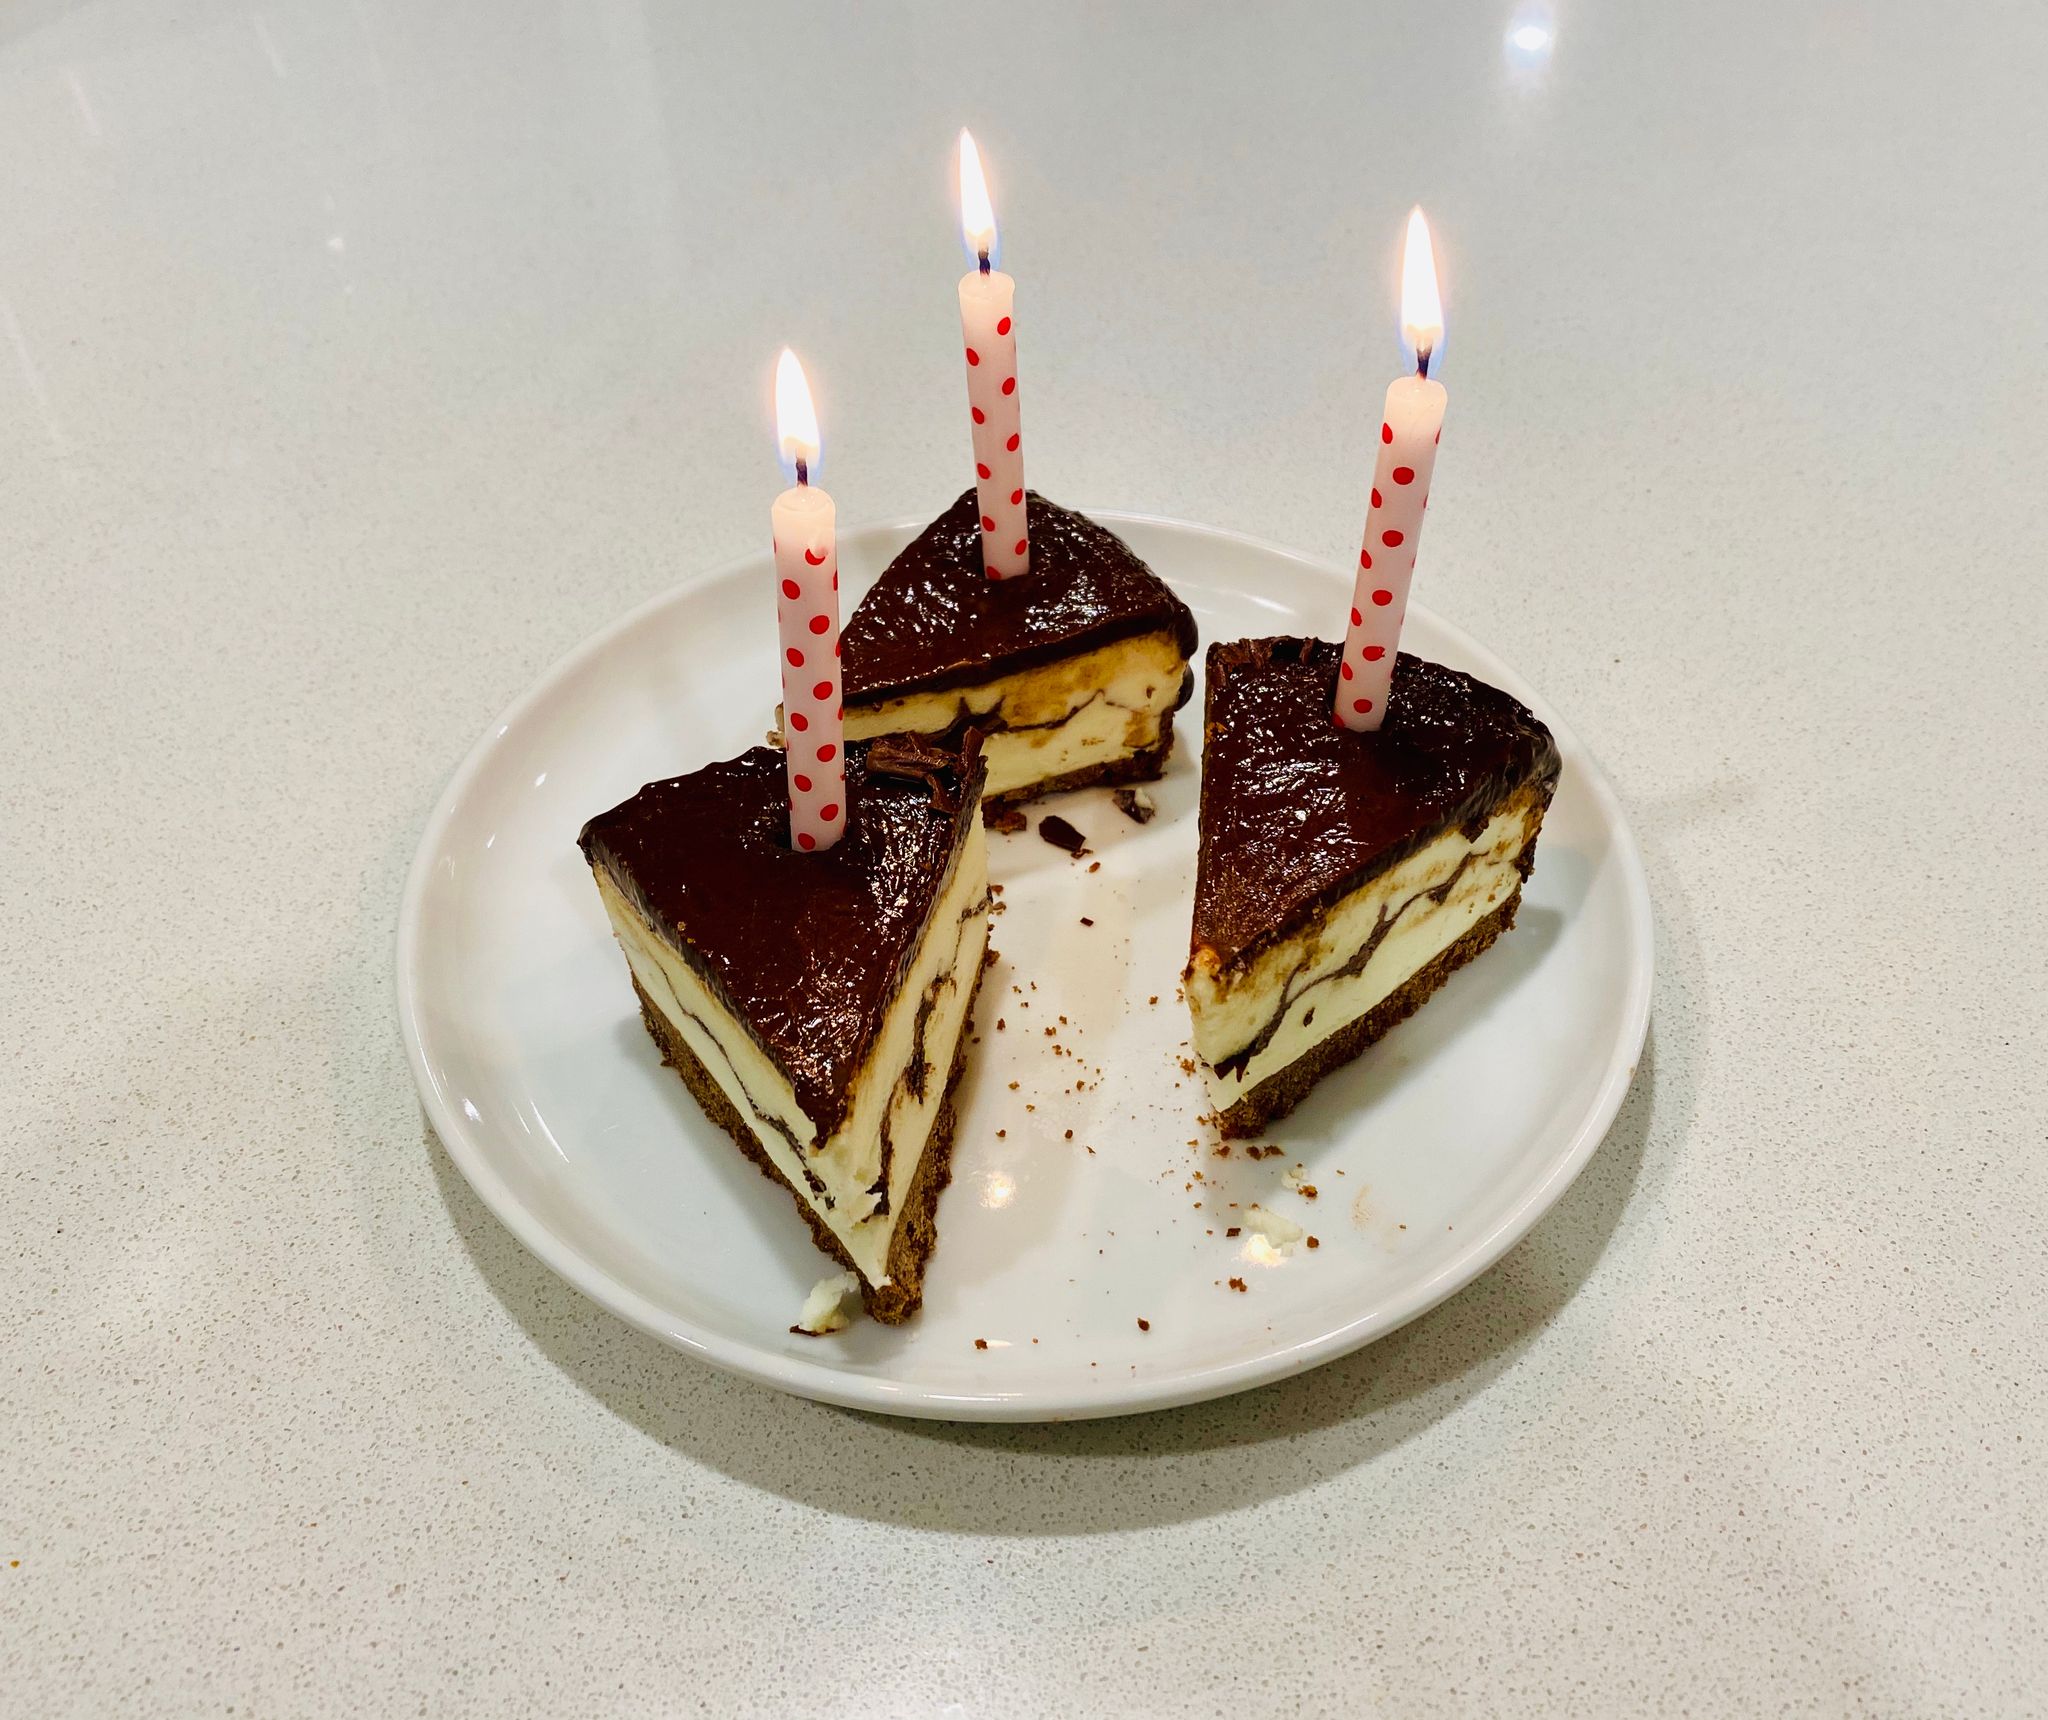 A photo of three small slices of chocolate-covered cheesecake with a lit candle on each piece.